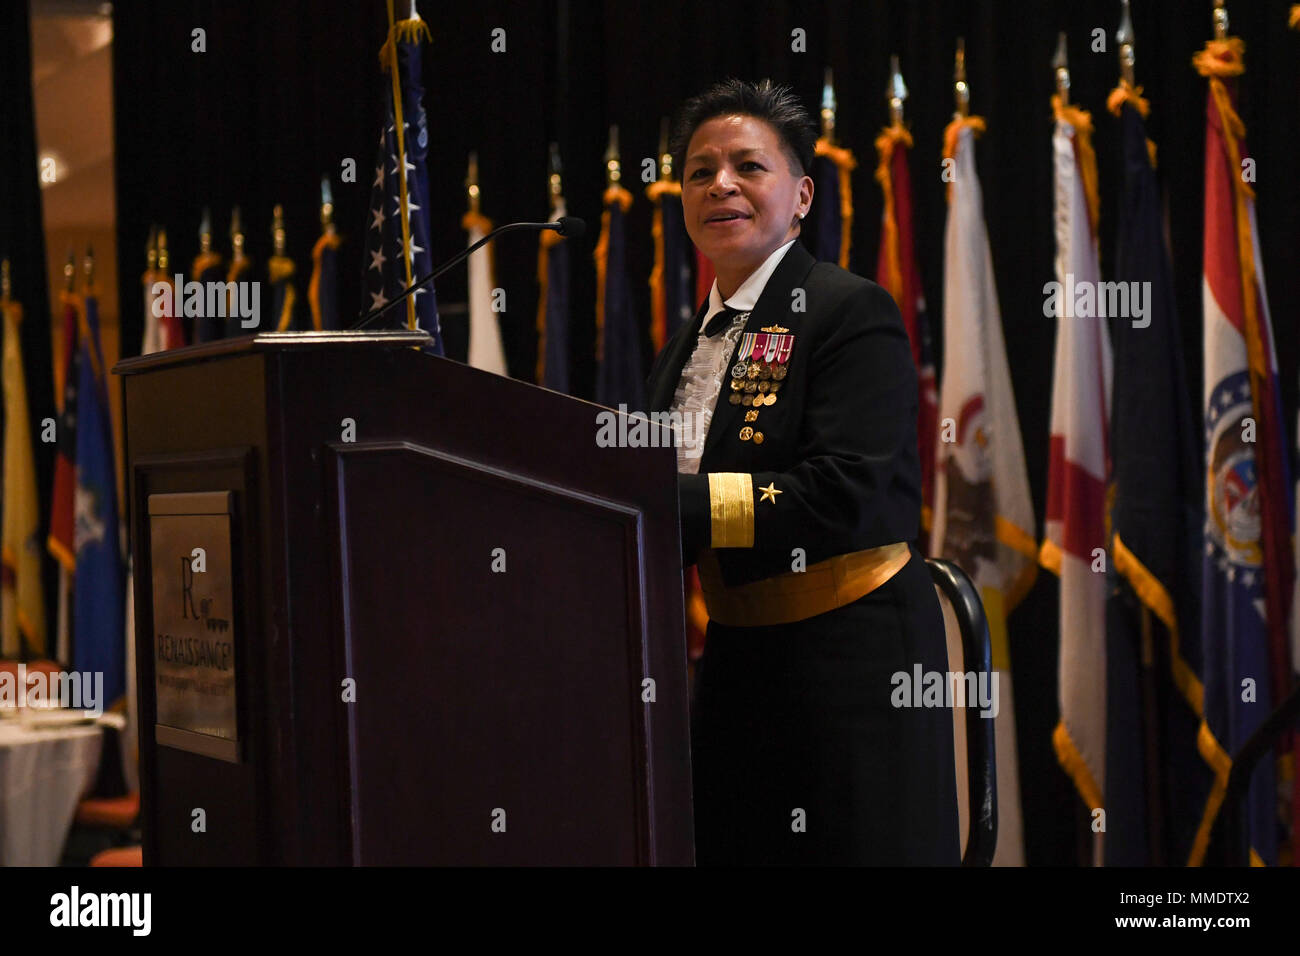 171021-N-TP832-094 JACKSONVILLE, Fla. (Oct. 21, 2017) Rear Adm. Bette Bolivar, commander, Navy Region Southeast, speaks at The World Golf Village Renaissance Hotel during the Jacksonville Tri-Base Area’s Navy Ball. This year’s theme was 'Sea Power to Protect and Promote,' and served as an opportunity to celebrate the Navy's 242nd birthday and honor its proud history, which traces its origins to the Continental Navy established Oct. 13, 1775. (U.S. Navy photo by Mass Communication Specialist 3rd Class Michael Lopez/Released) Stock Photo